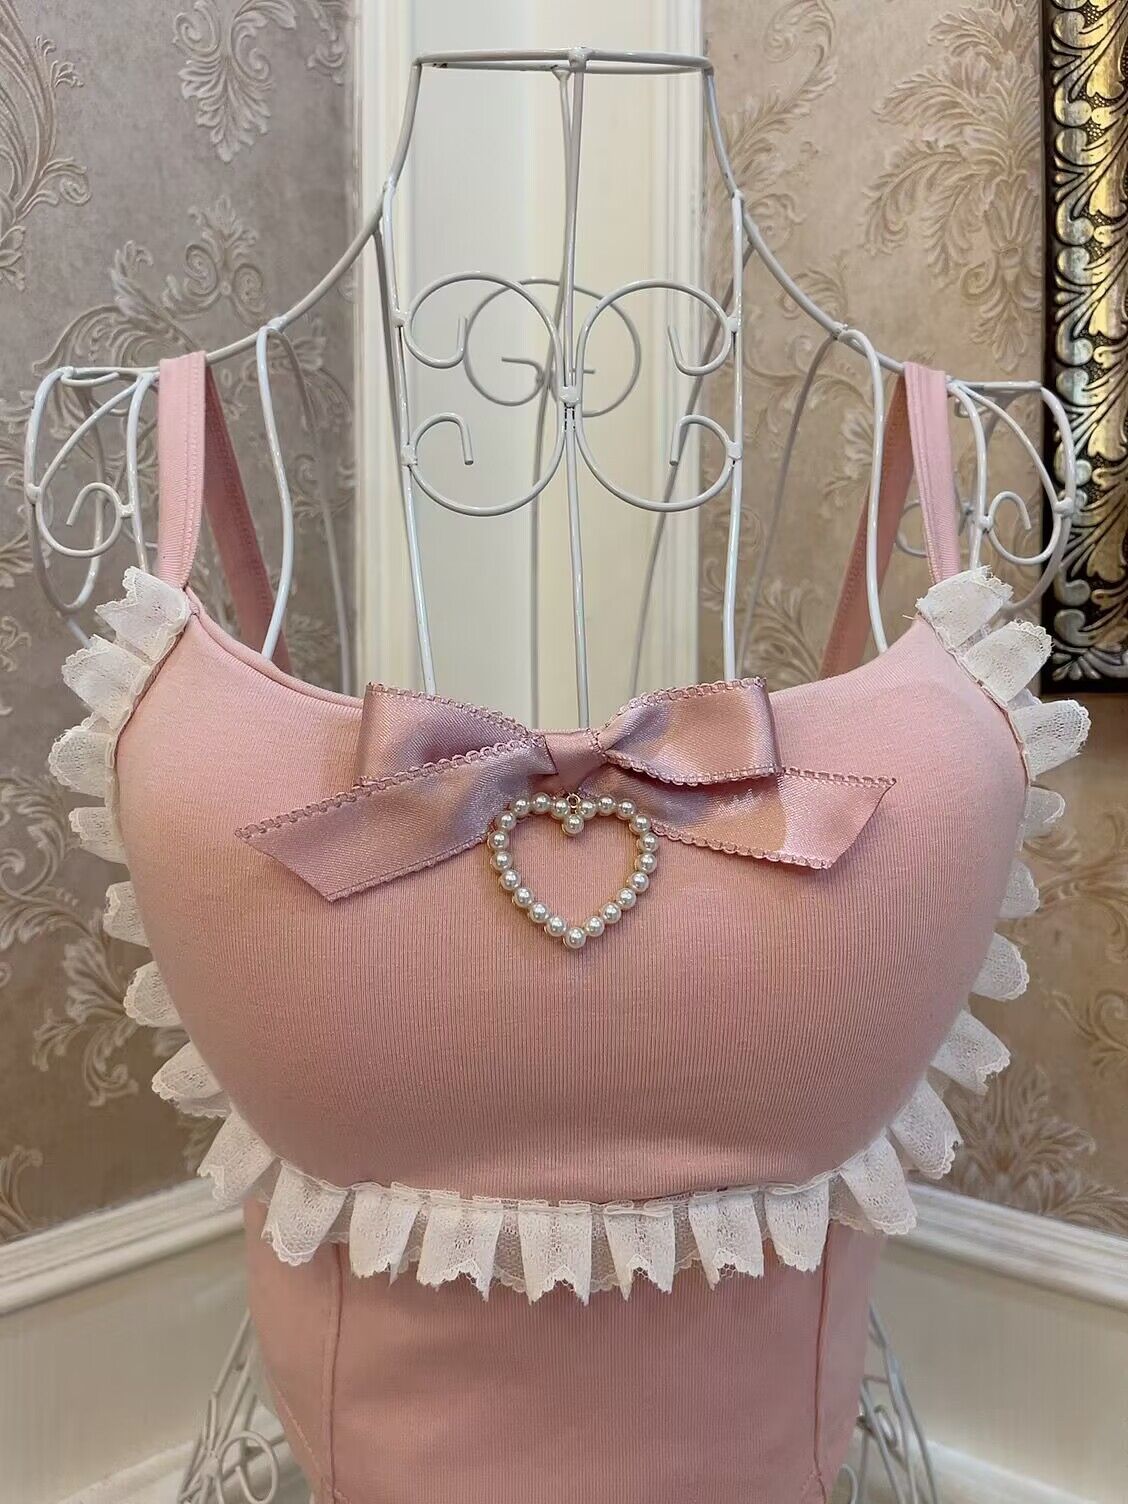 Sweetheart Princess Lace Frills Pink White Camisole Top